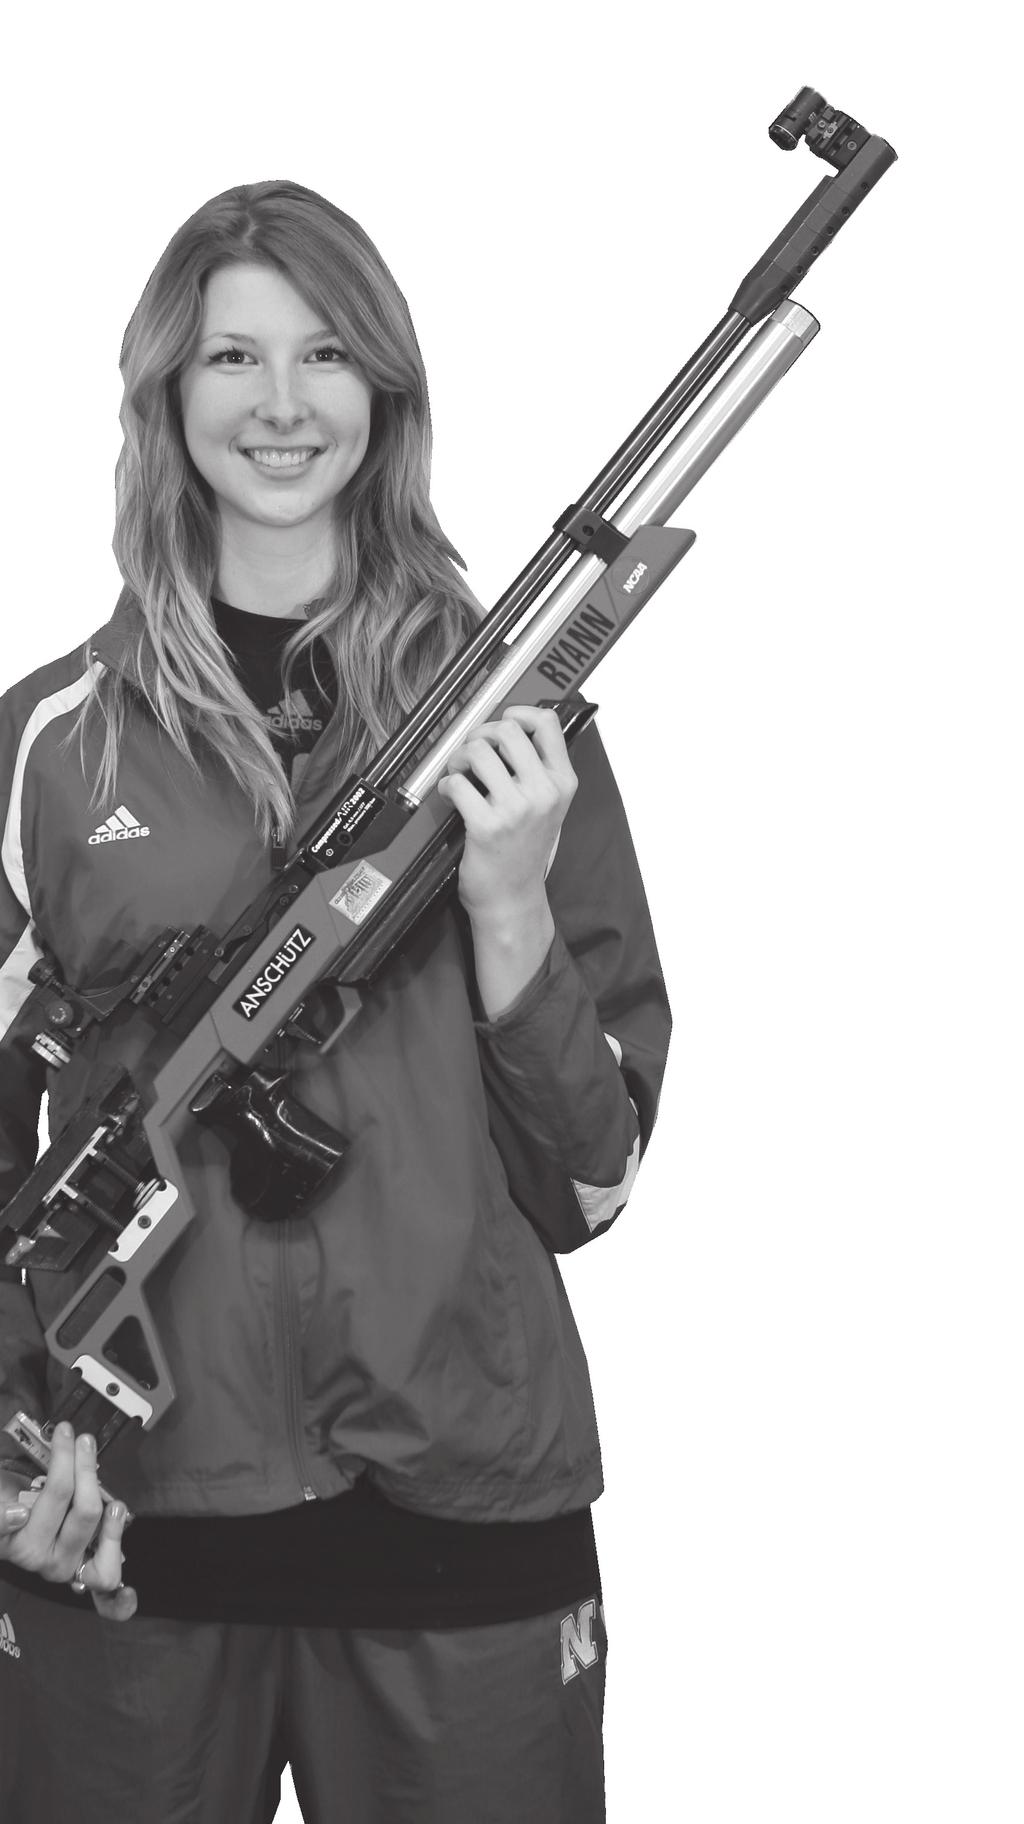 respectively. For her team-leading 573.4 smallbore average, McGough earned honorable-mention All-America honors.